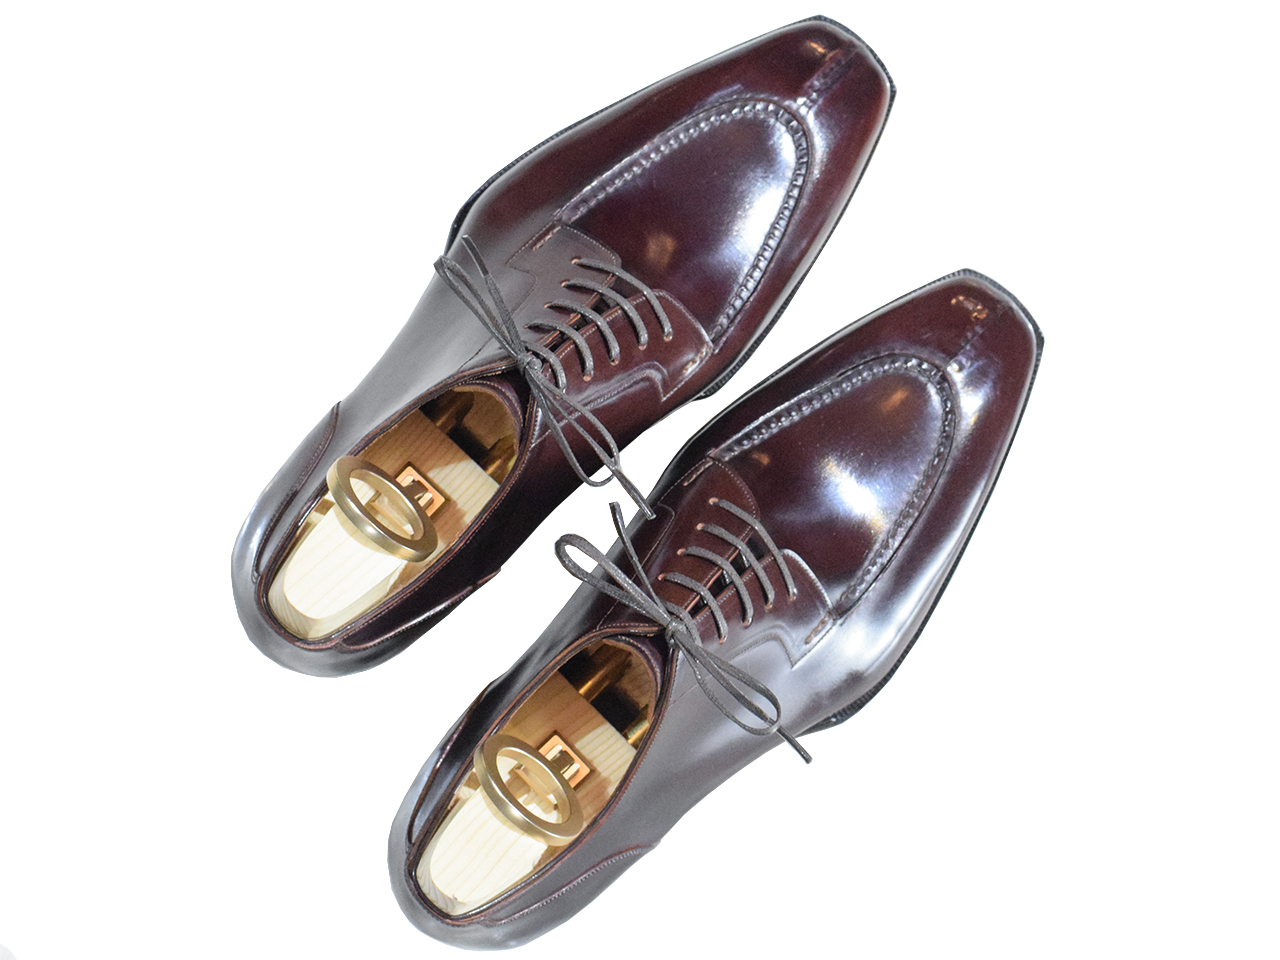 MTO Derby Split Toe Shoes Shell Cordovan Leather